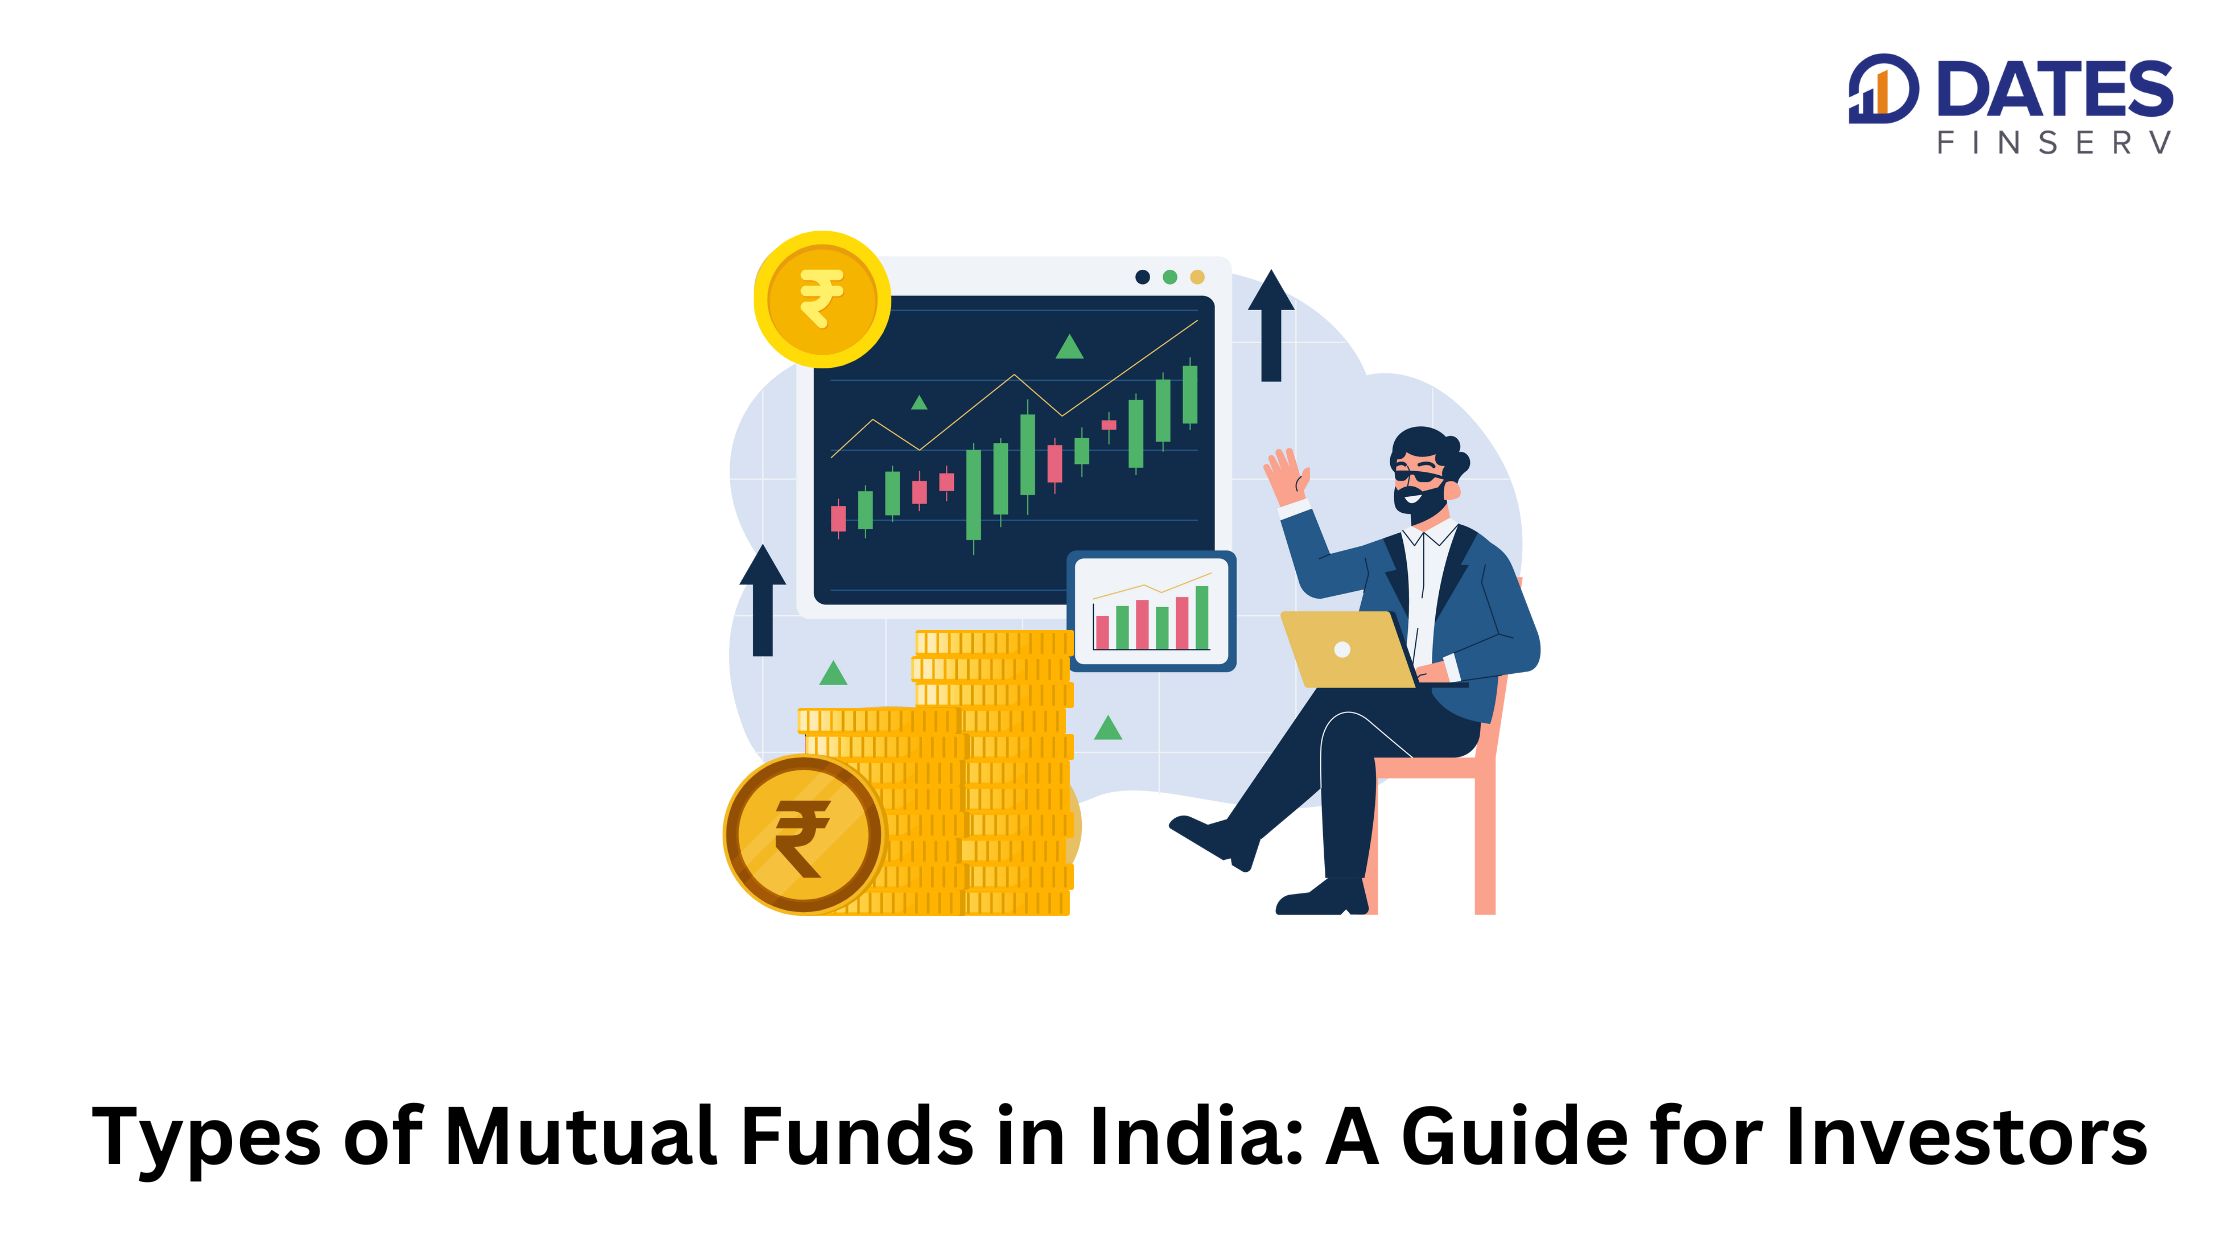 Types of Mutual Funds in India: A Guide for Investors